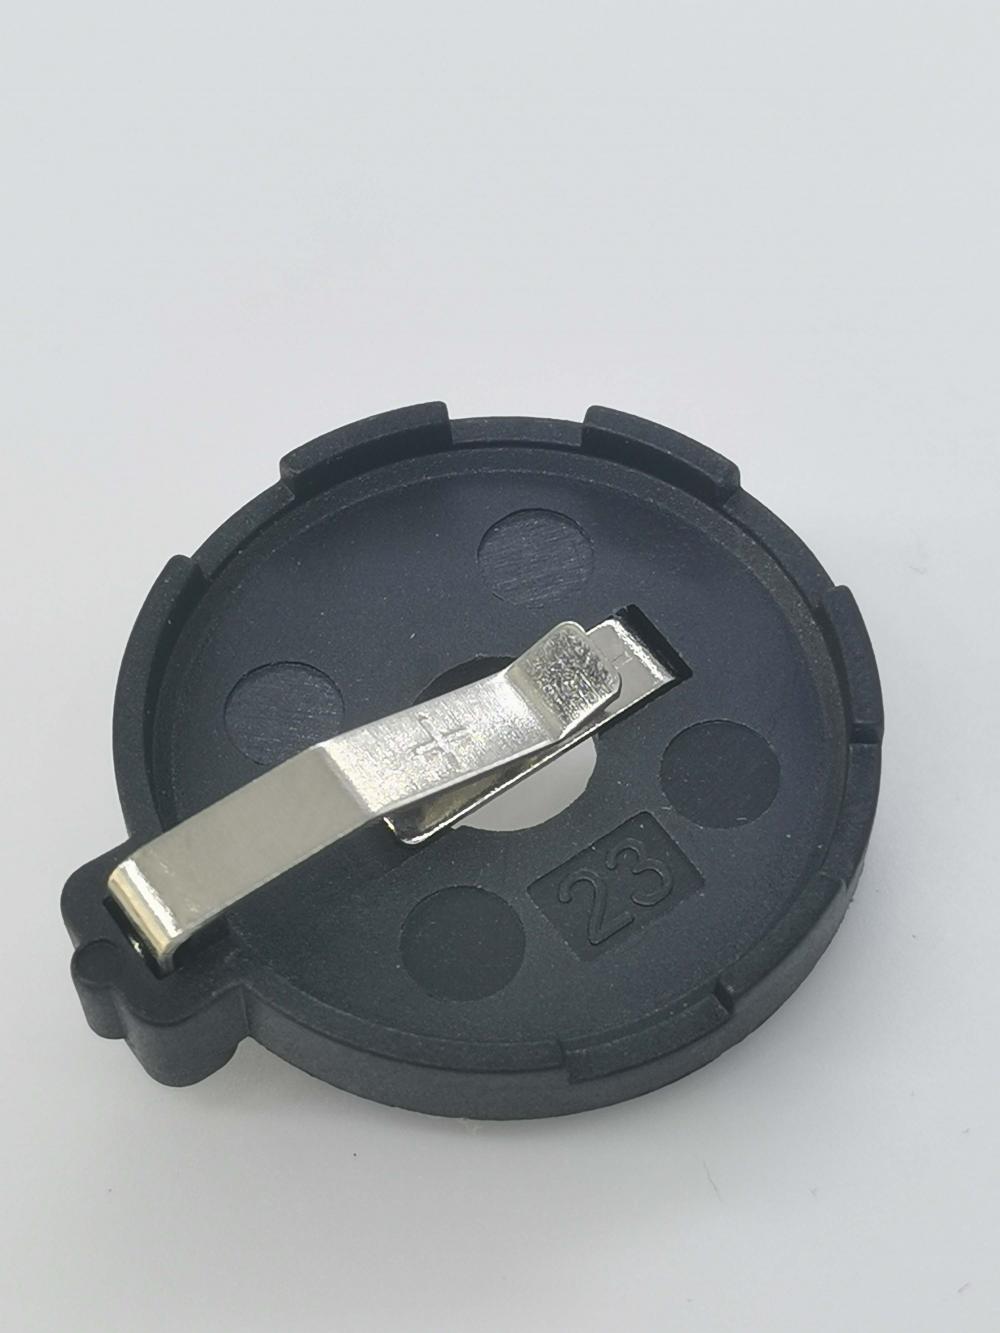 Cr2330a Coin Cell Battery Holders 2